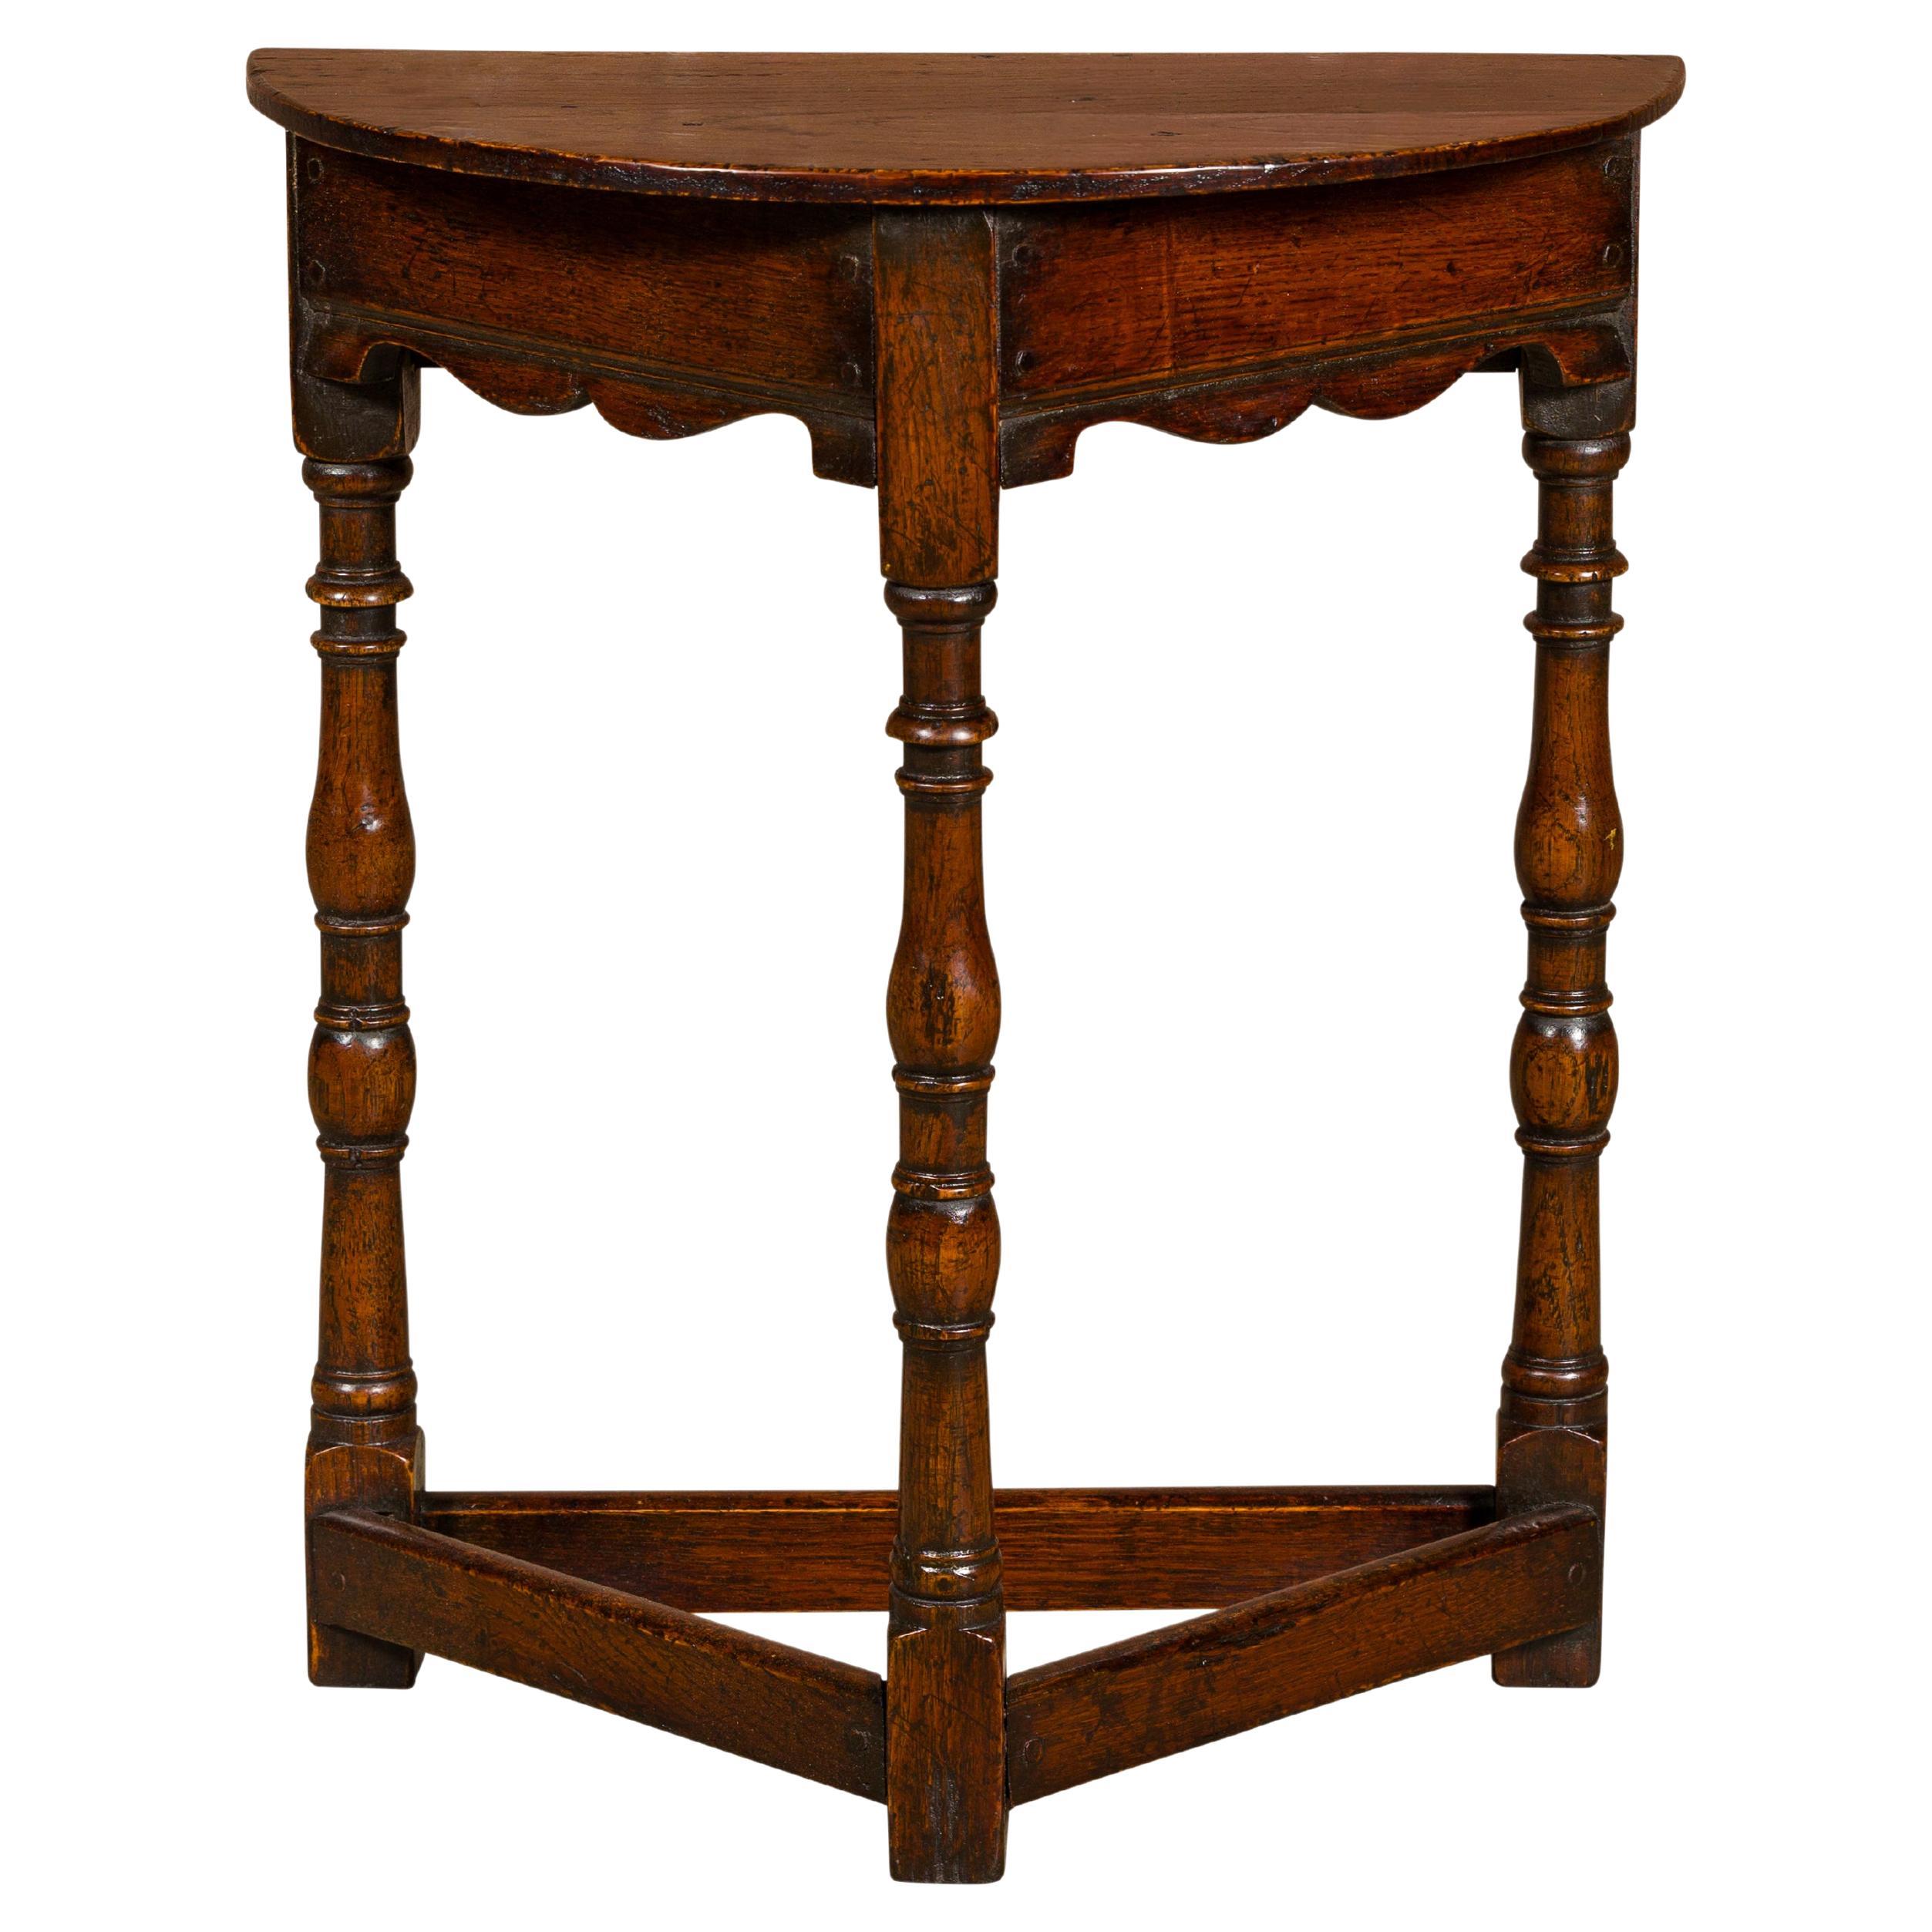 English 19th Century Small Oak Demi-Lune Table with Turned Legs and Carved Apron